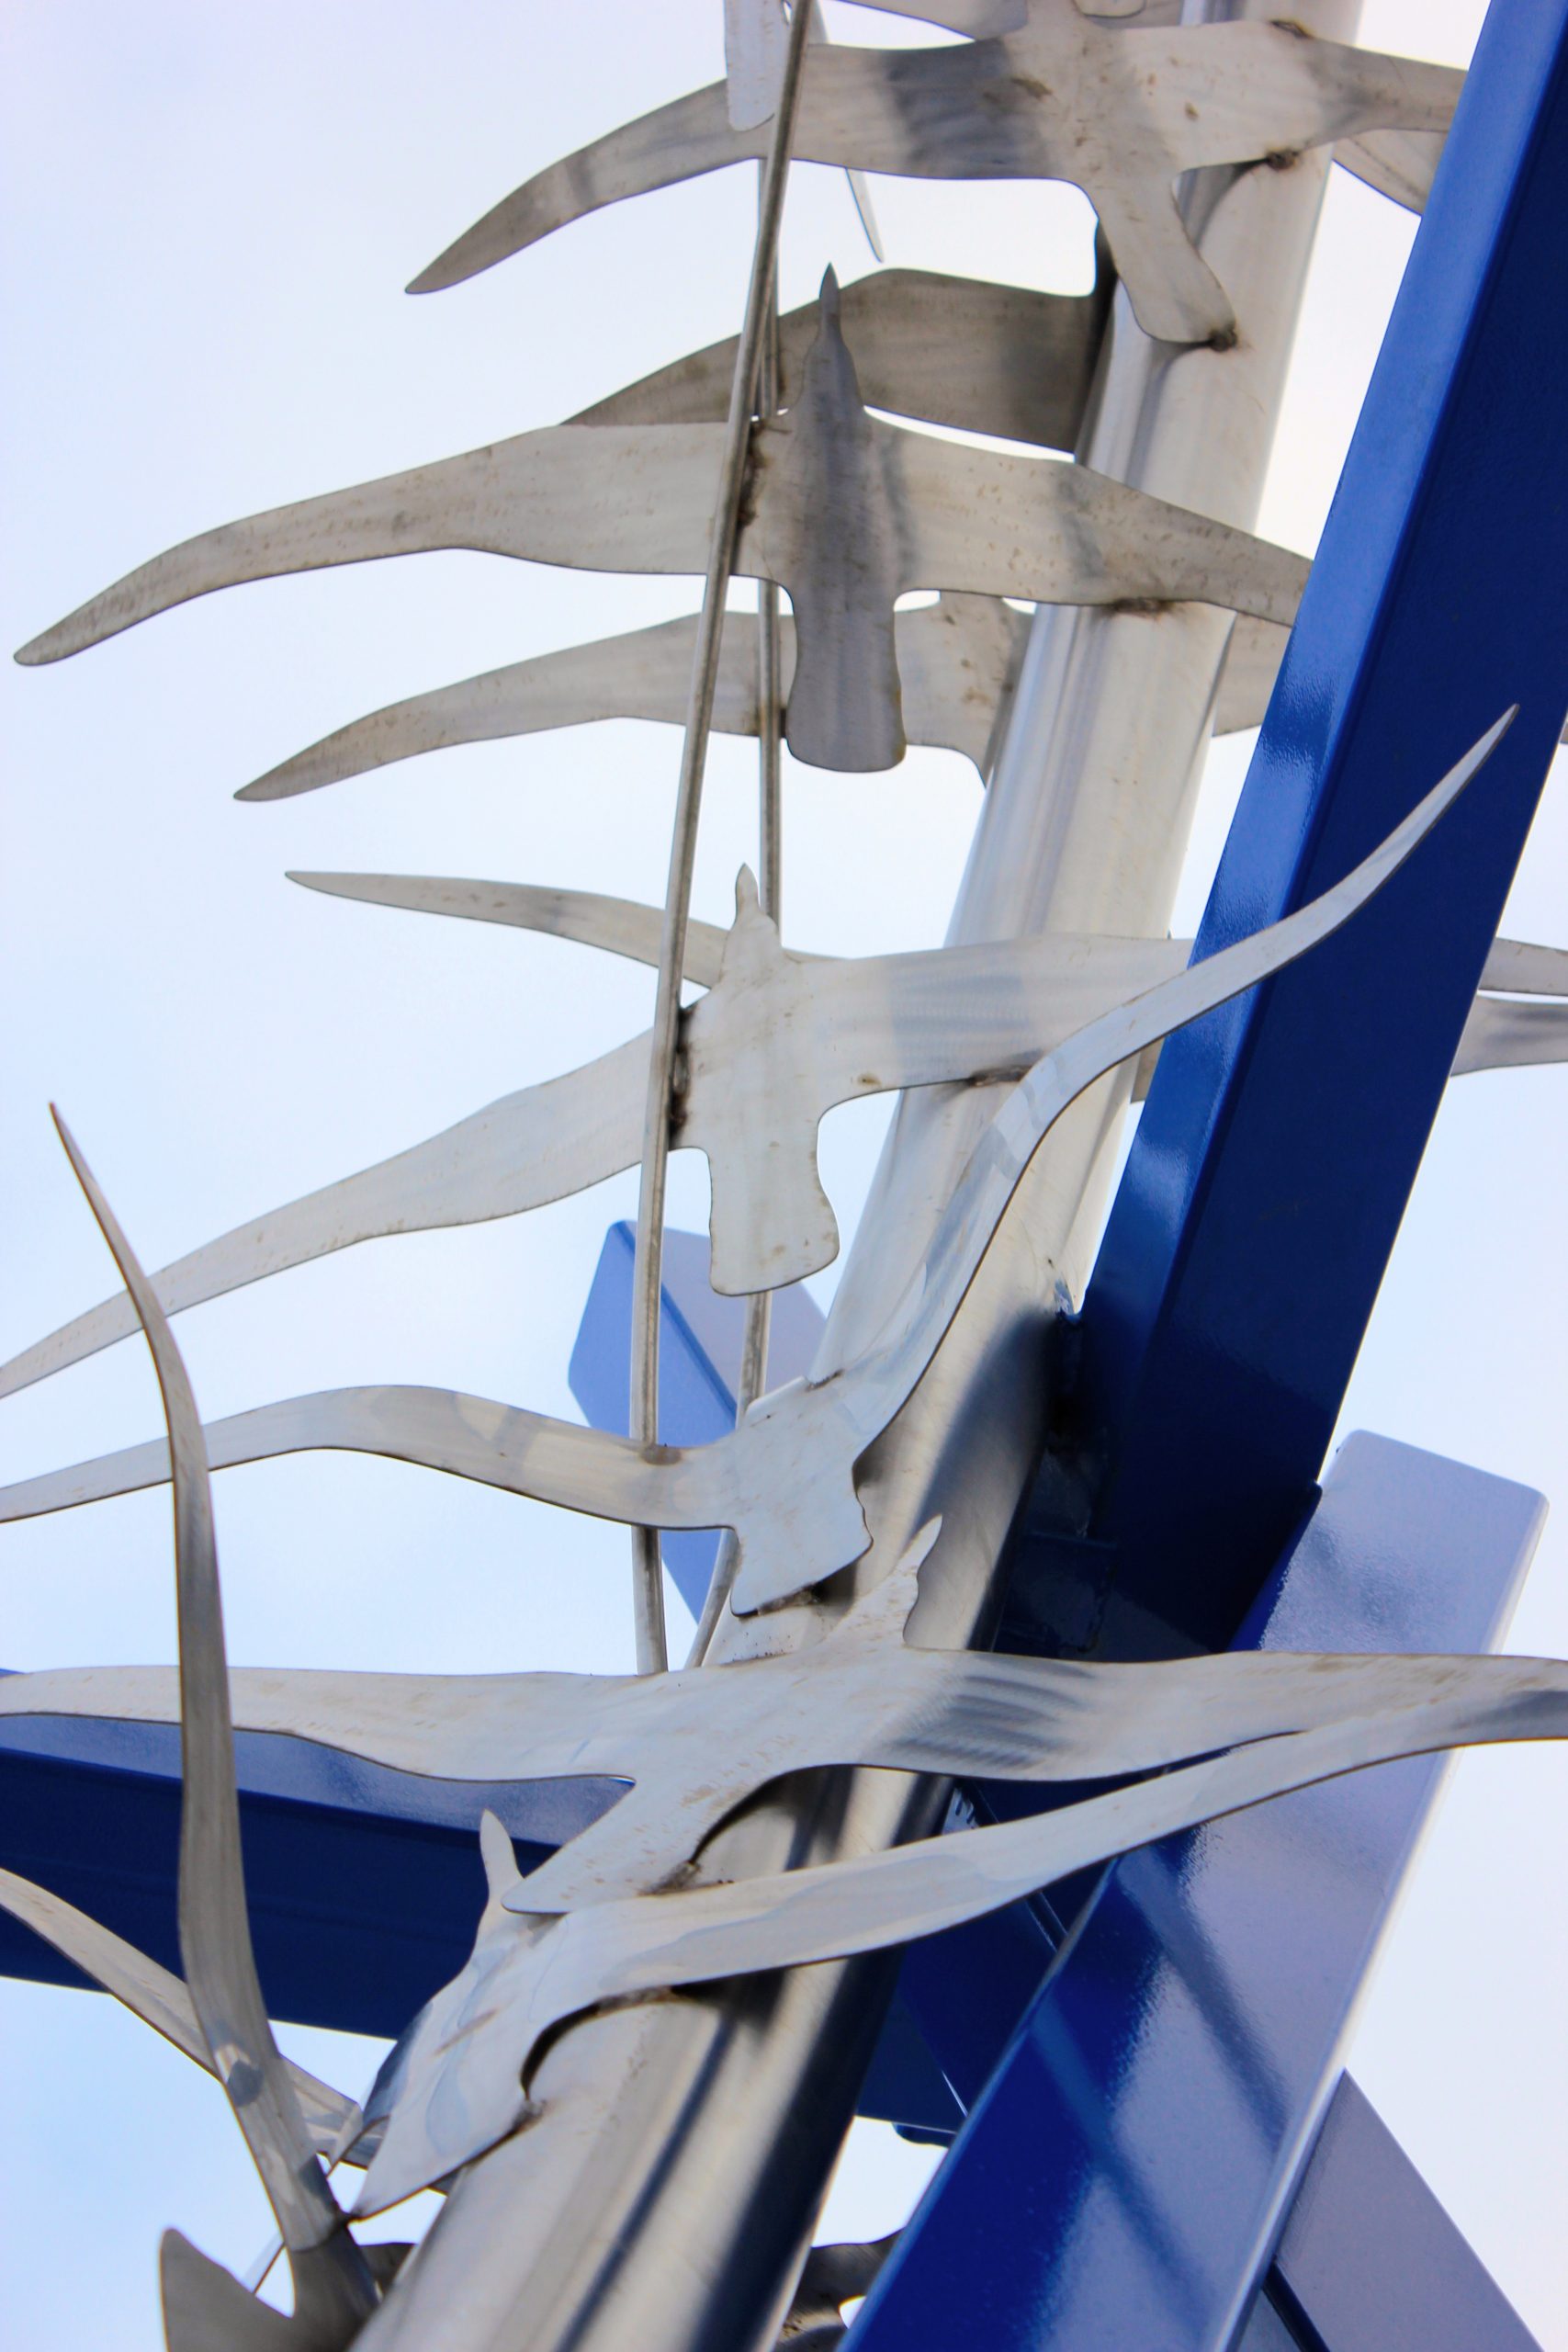 Freedom (Roundabout sculpture)